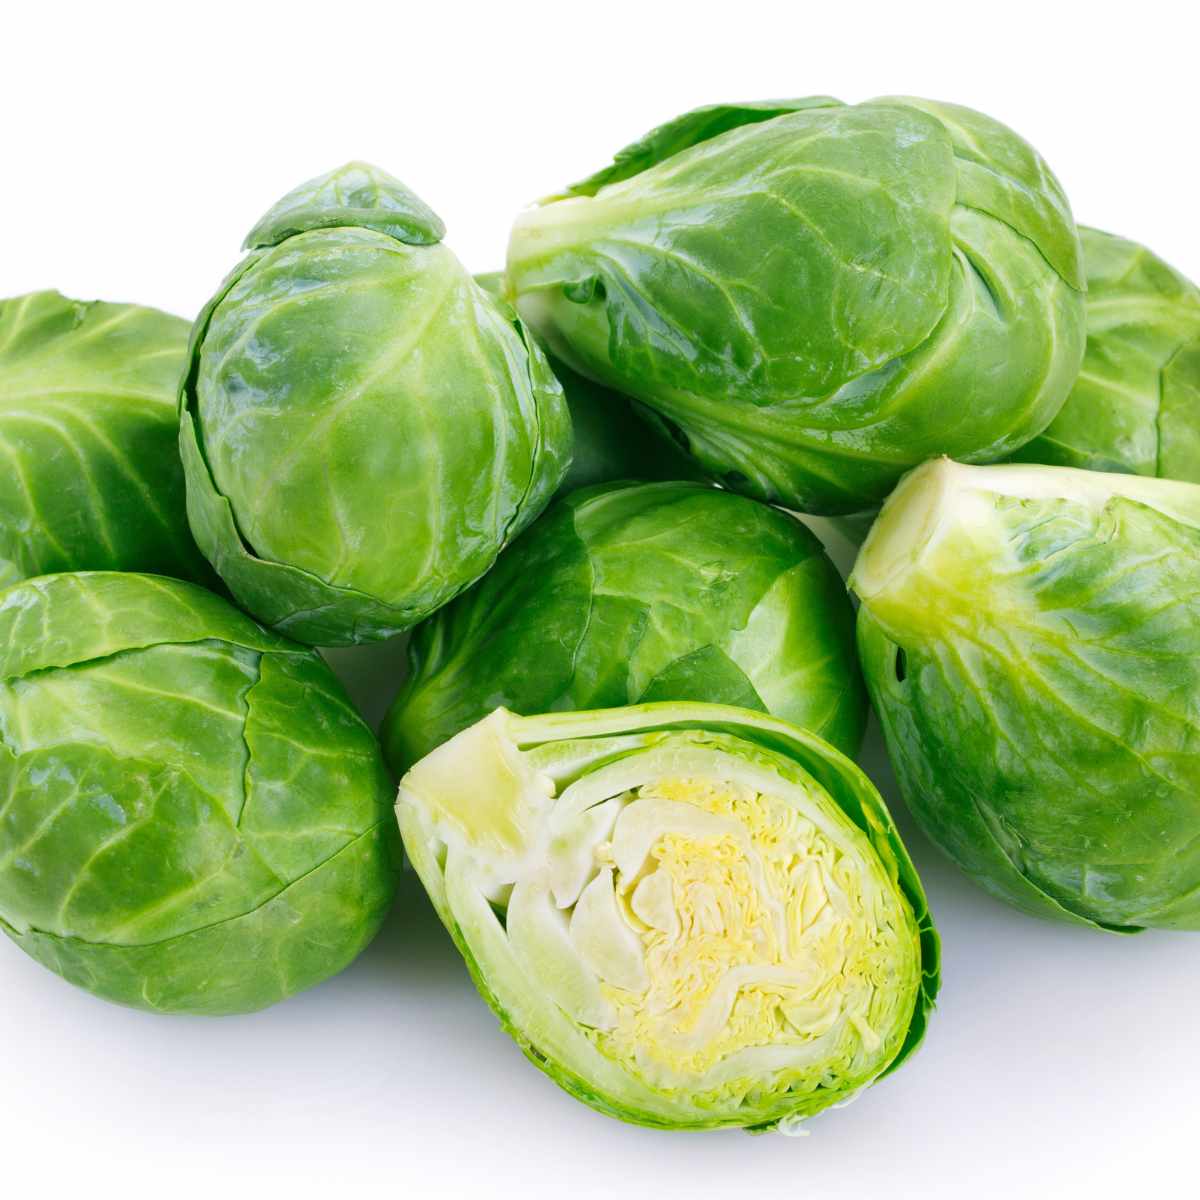 Brussels sprouts on a white background.